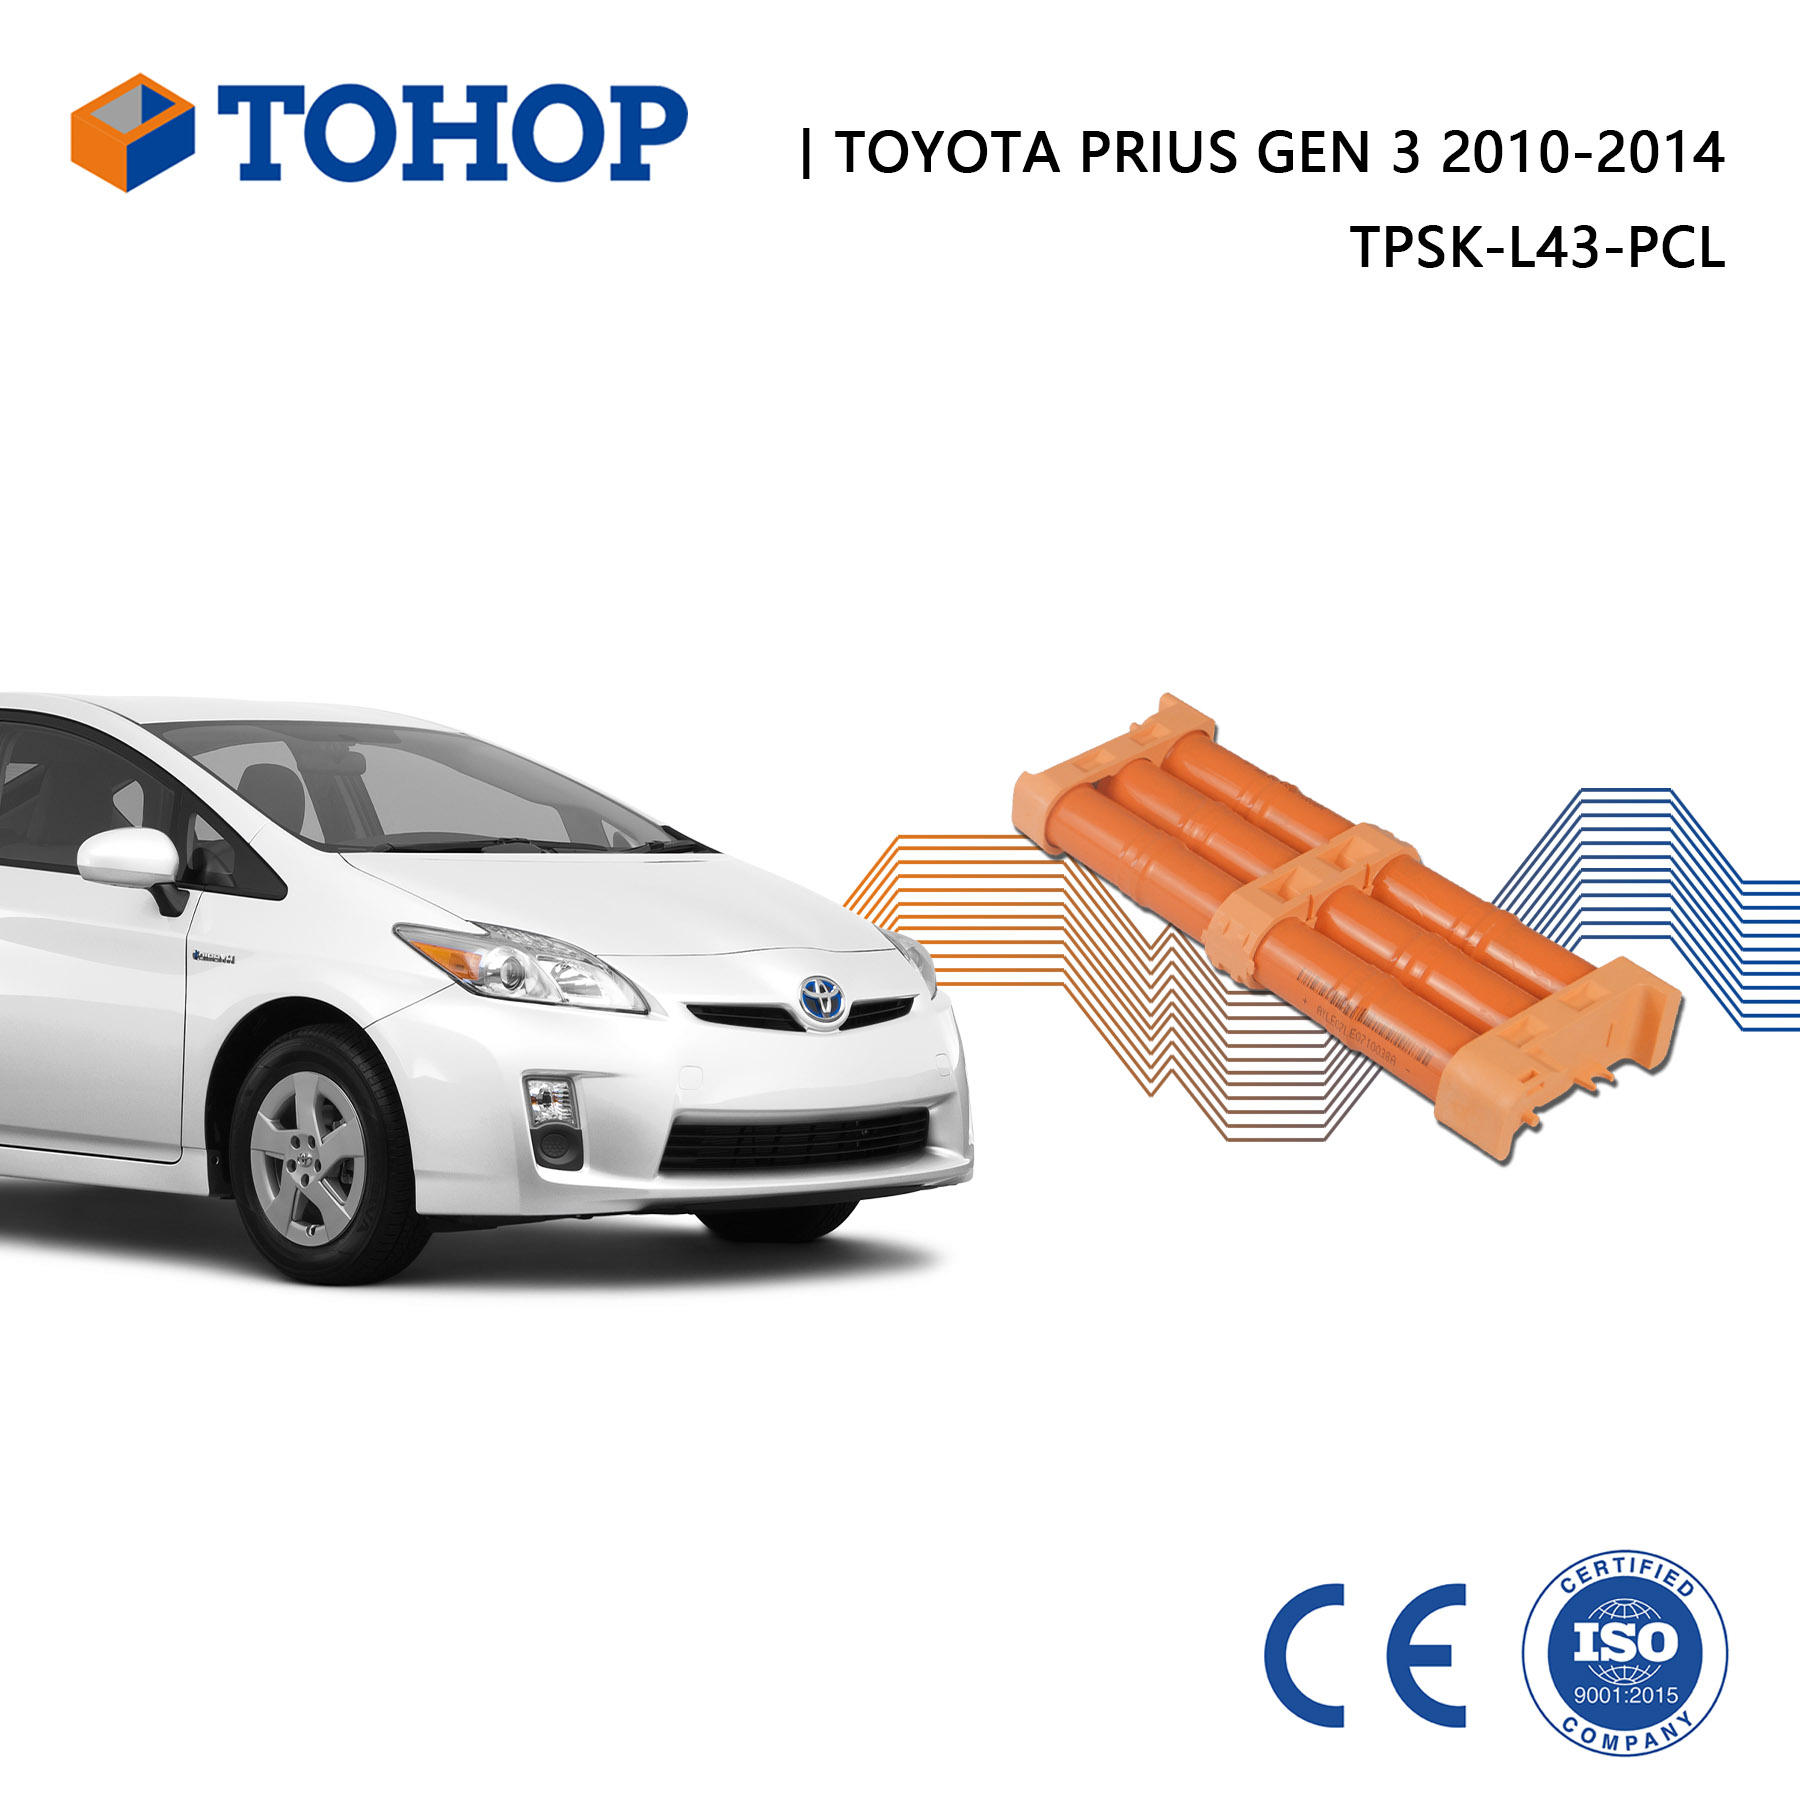 Gen 3 Prius 2010 Replacement Hybrid Car Battery for Toyota